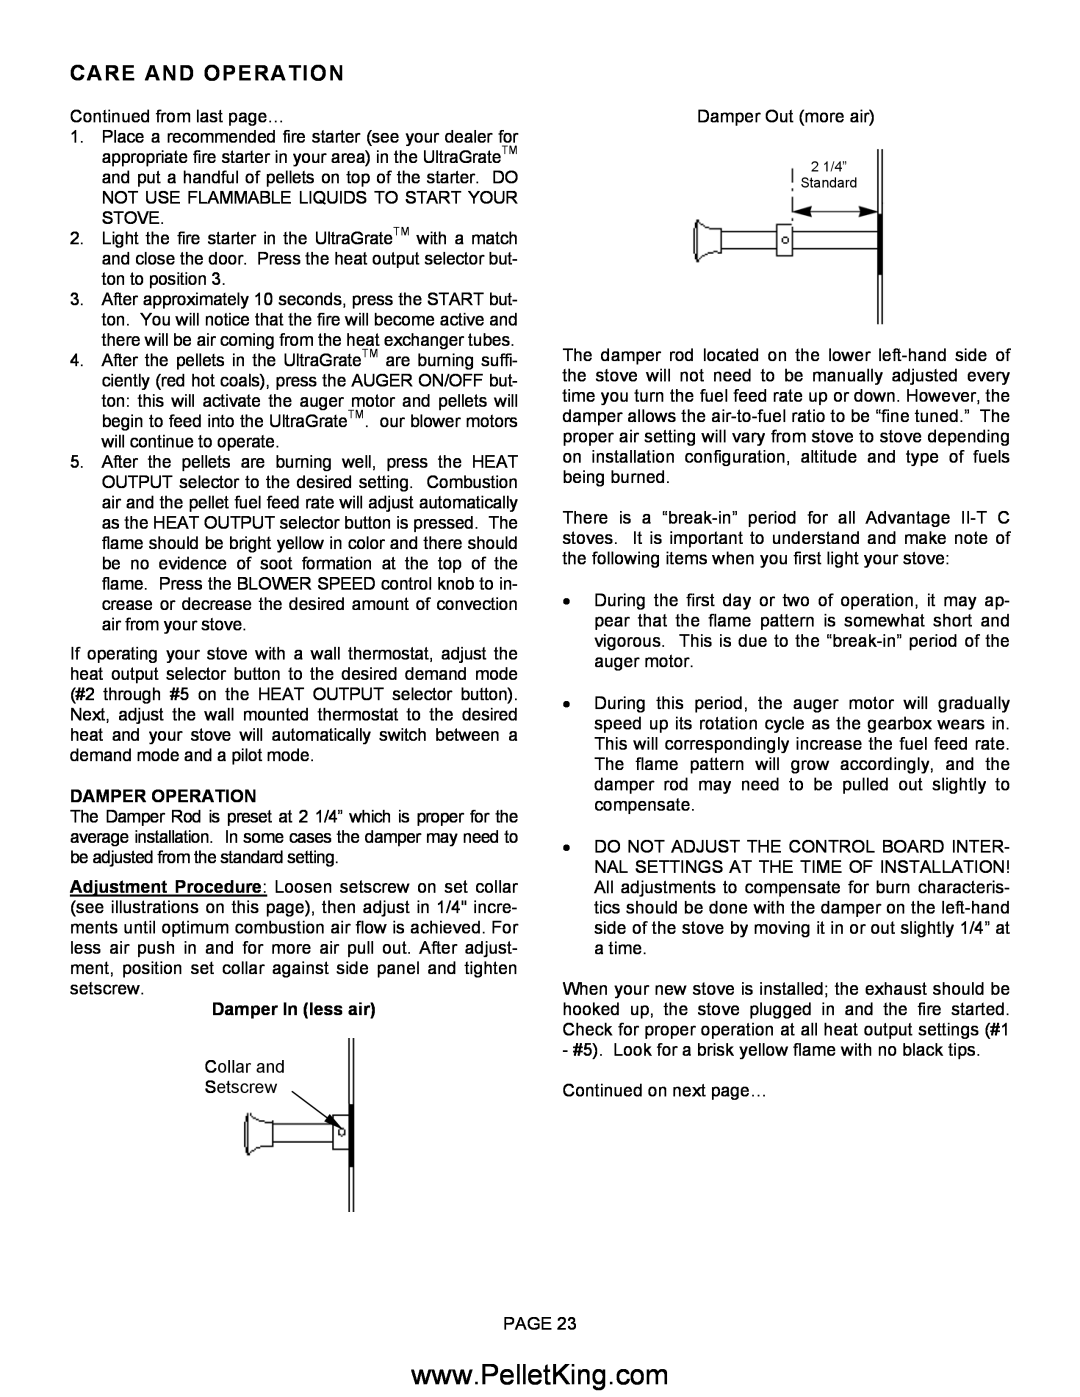 Lennox Hearth II-T C FS, II-T C INS operation manual Damper Operation, Damper In less air, Care And Operation 